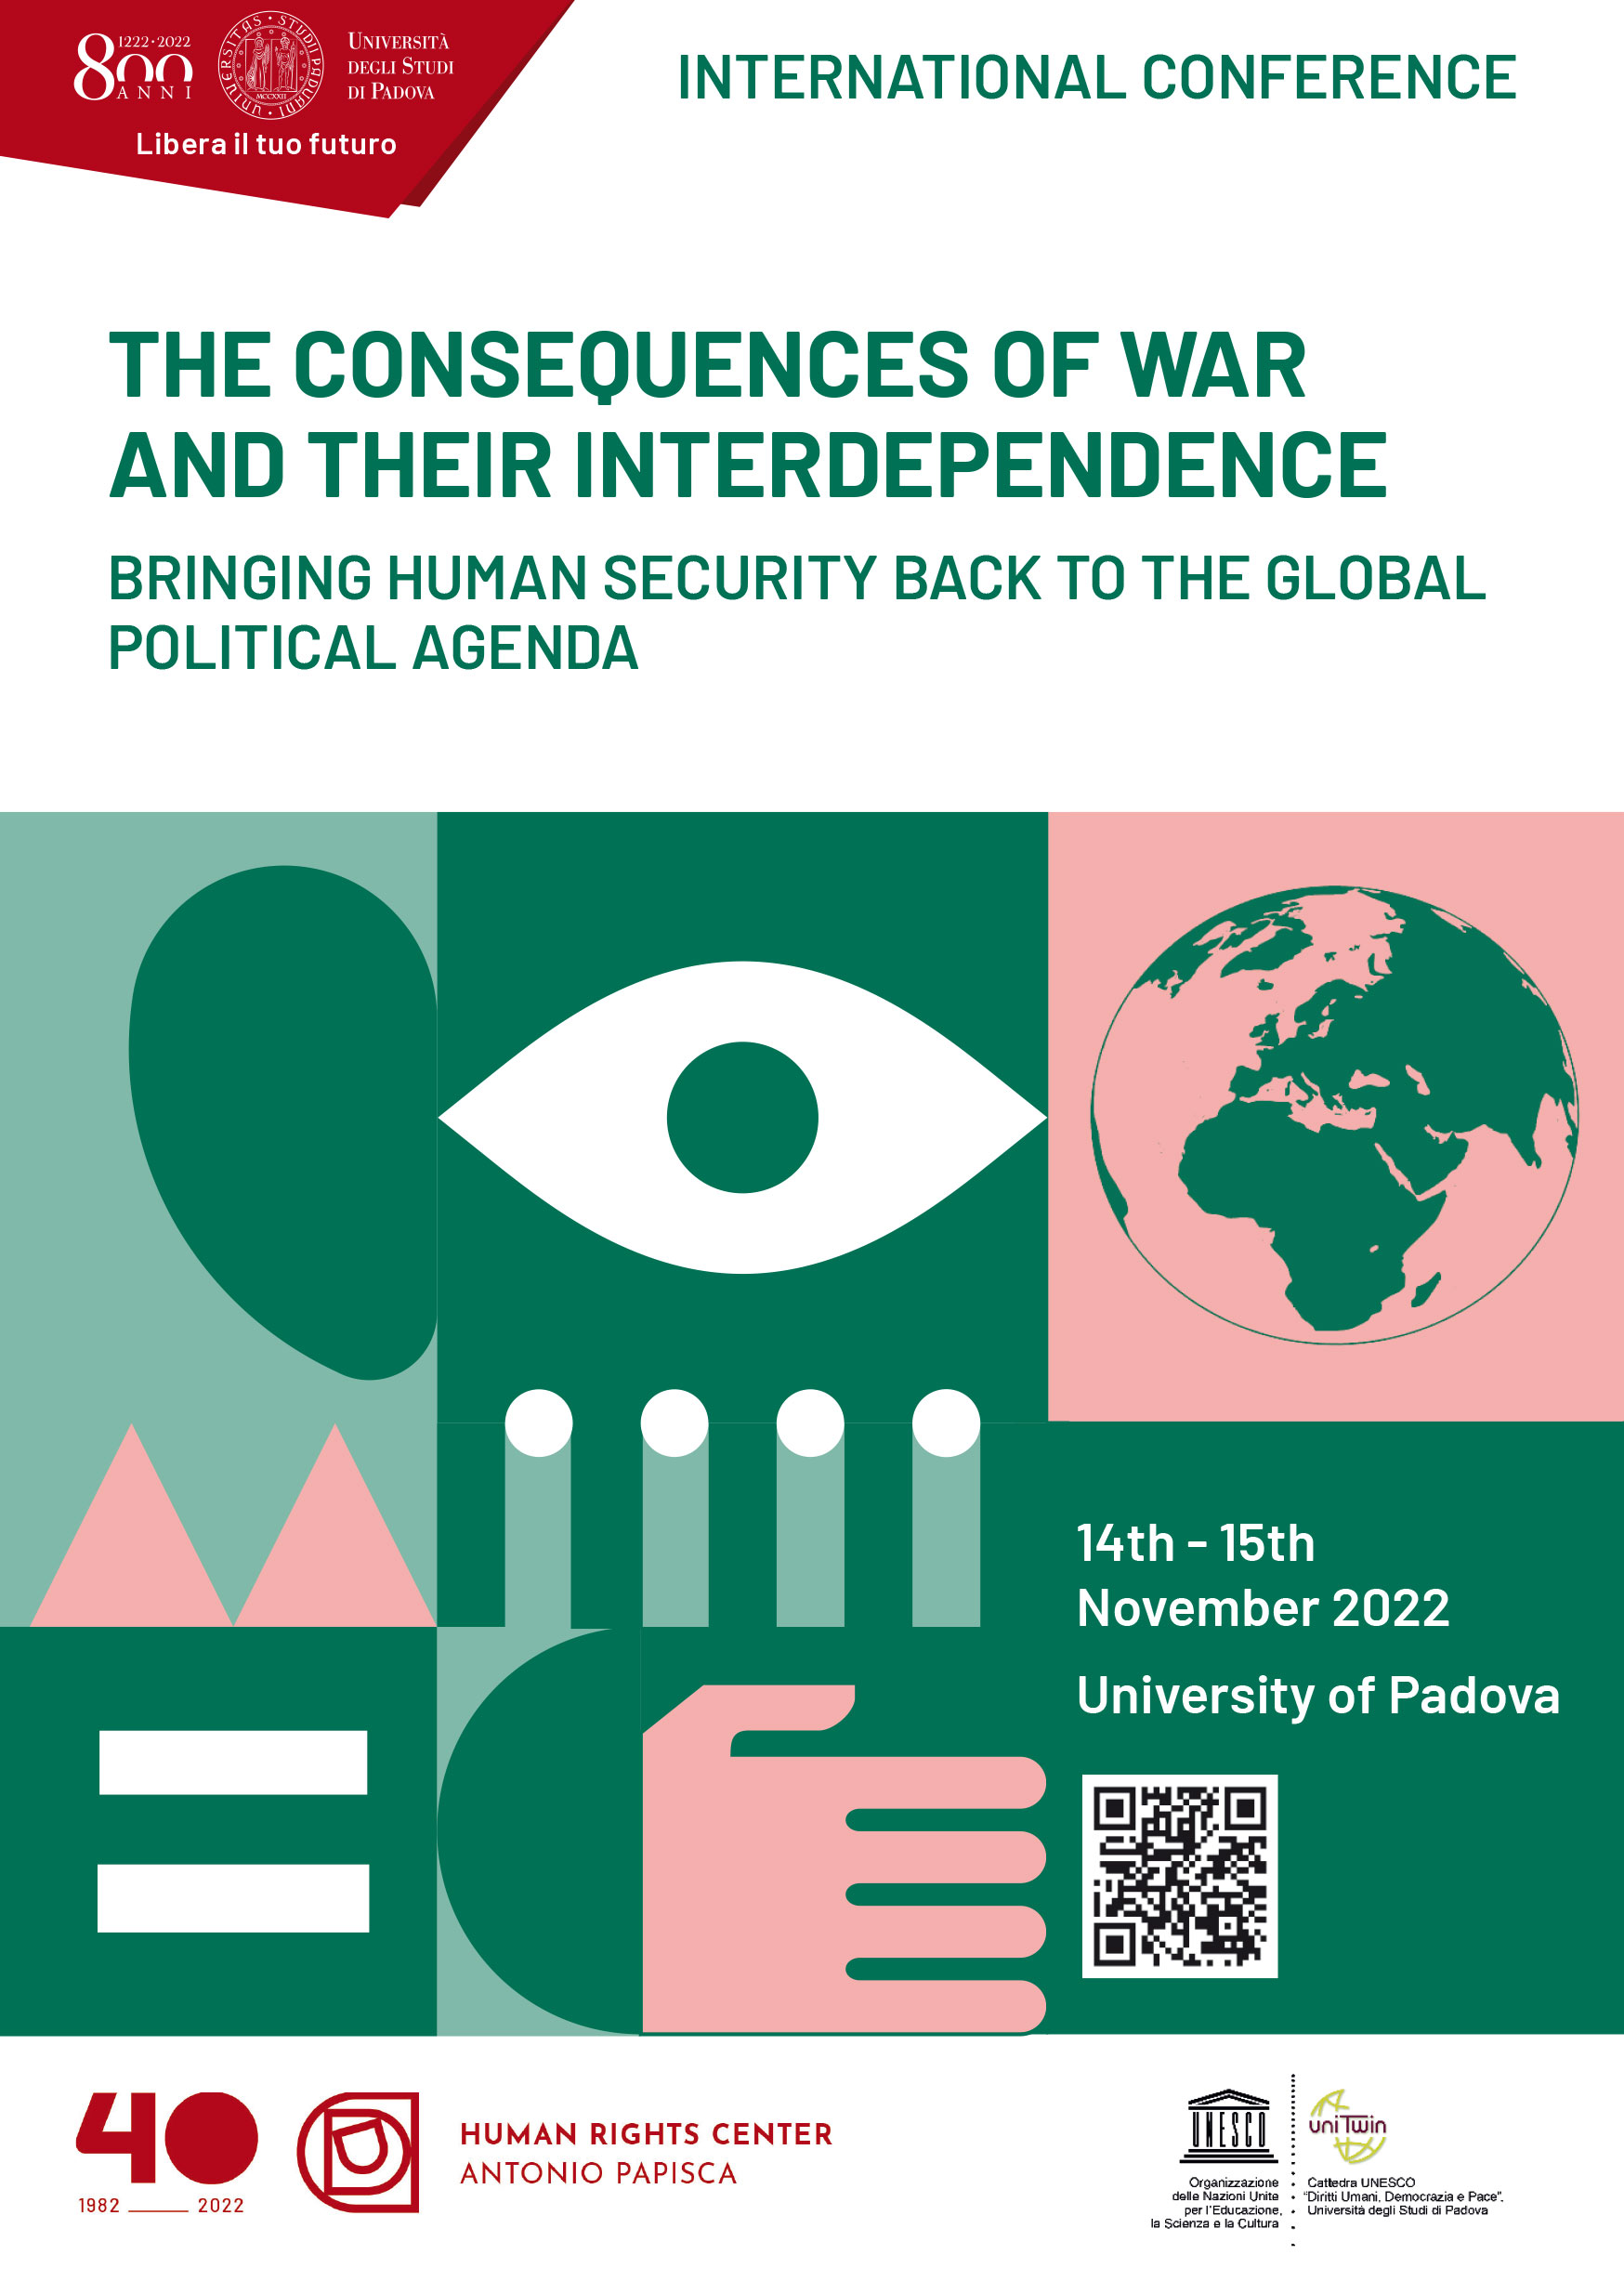 International Conference "The Consequences of War and their Interdependence. Bringing Human Security Back to the Global Political Agenda", University of Padova, 14-15 November 2022, depliant